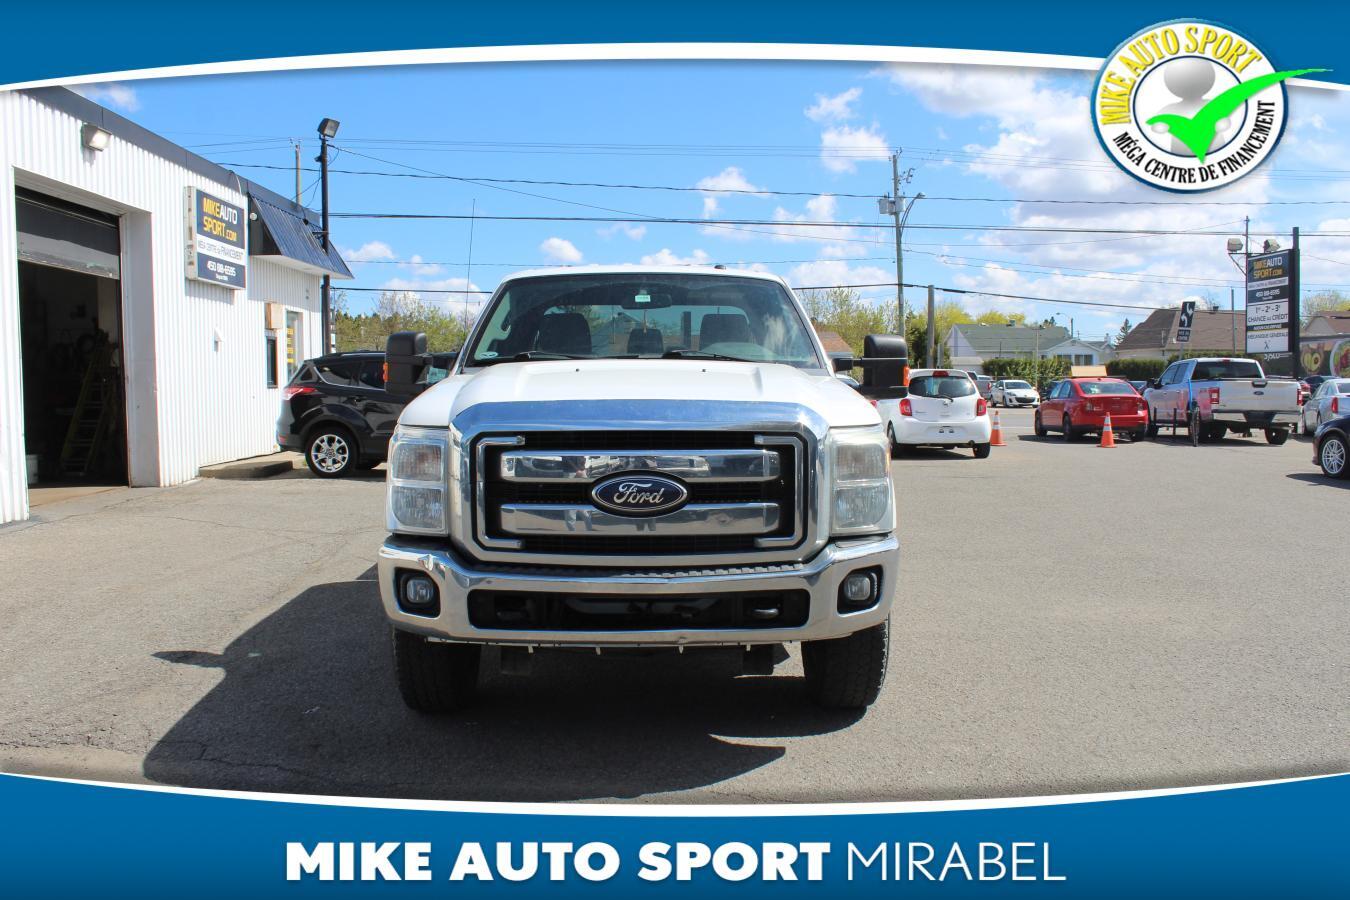 2012 Ford F-250 4 RM, Cabine multiplaces 156 po, XL